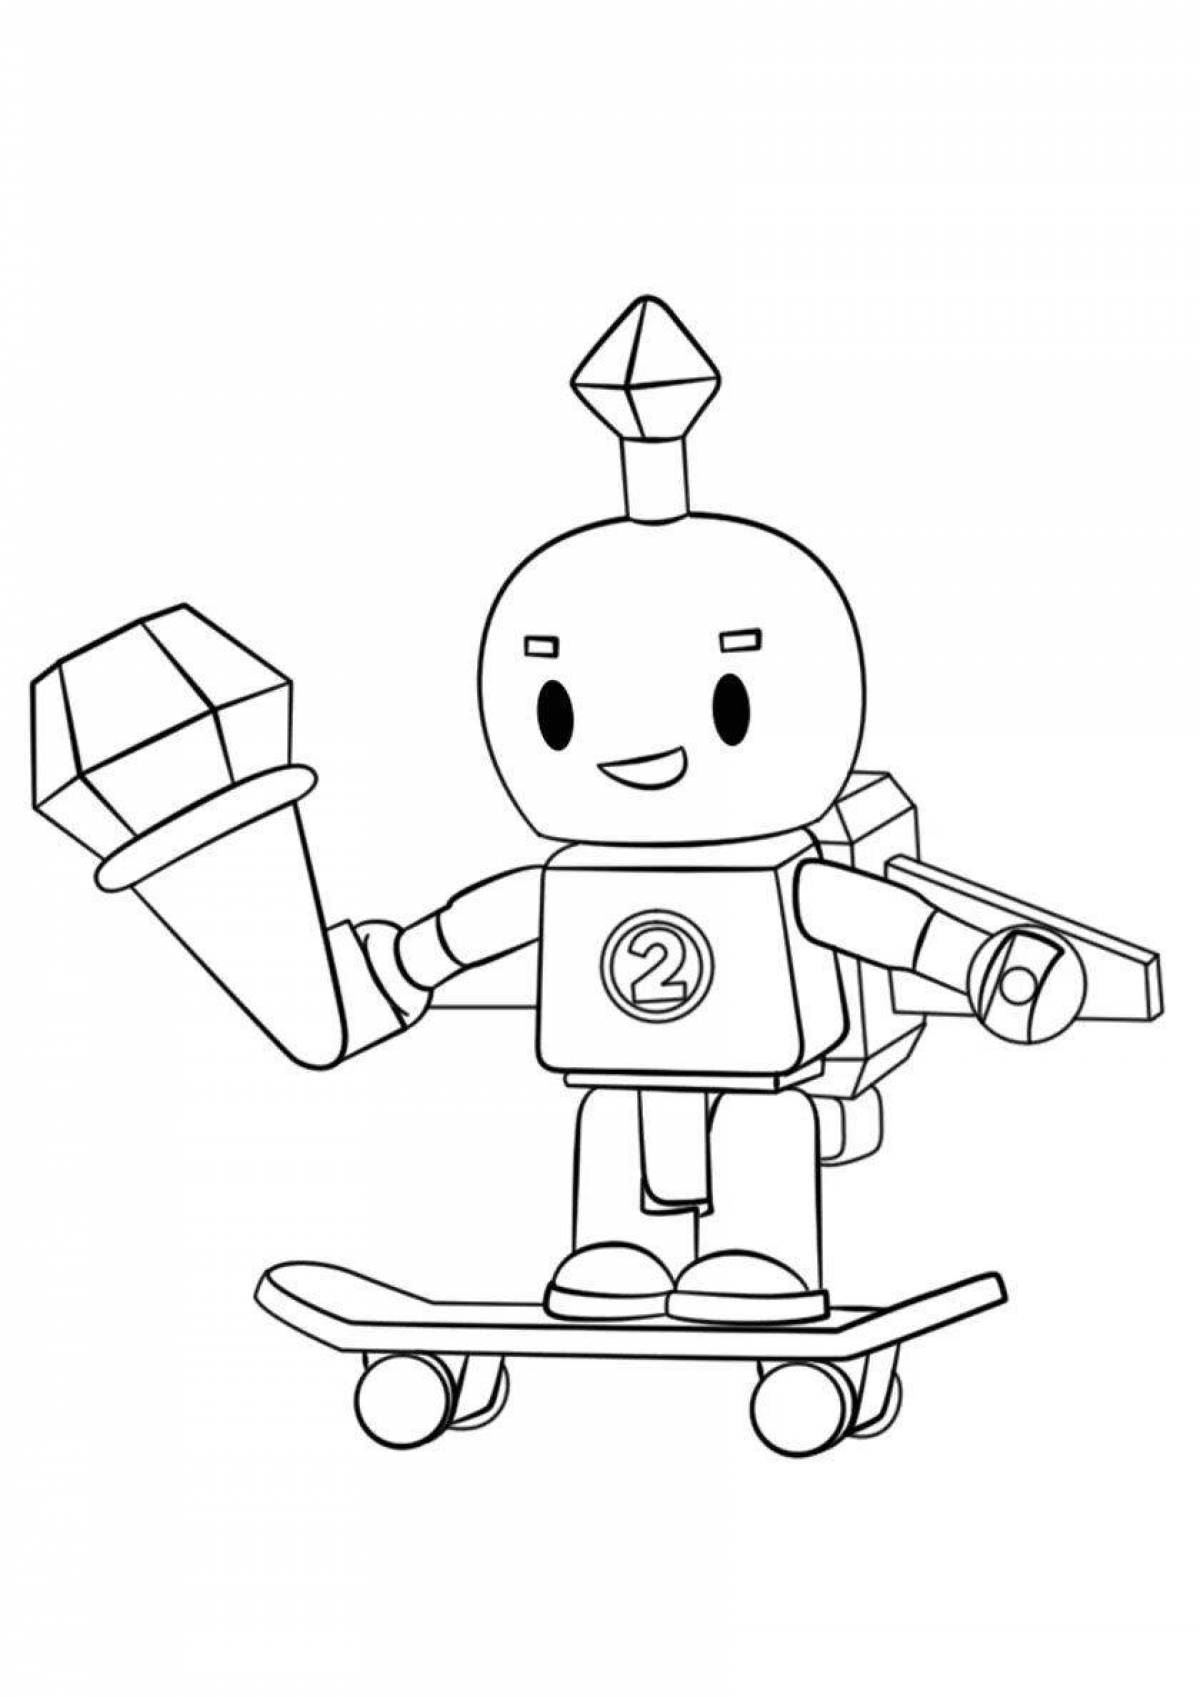 Robloxers adorable coloring pages